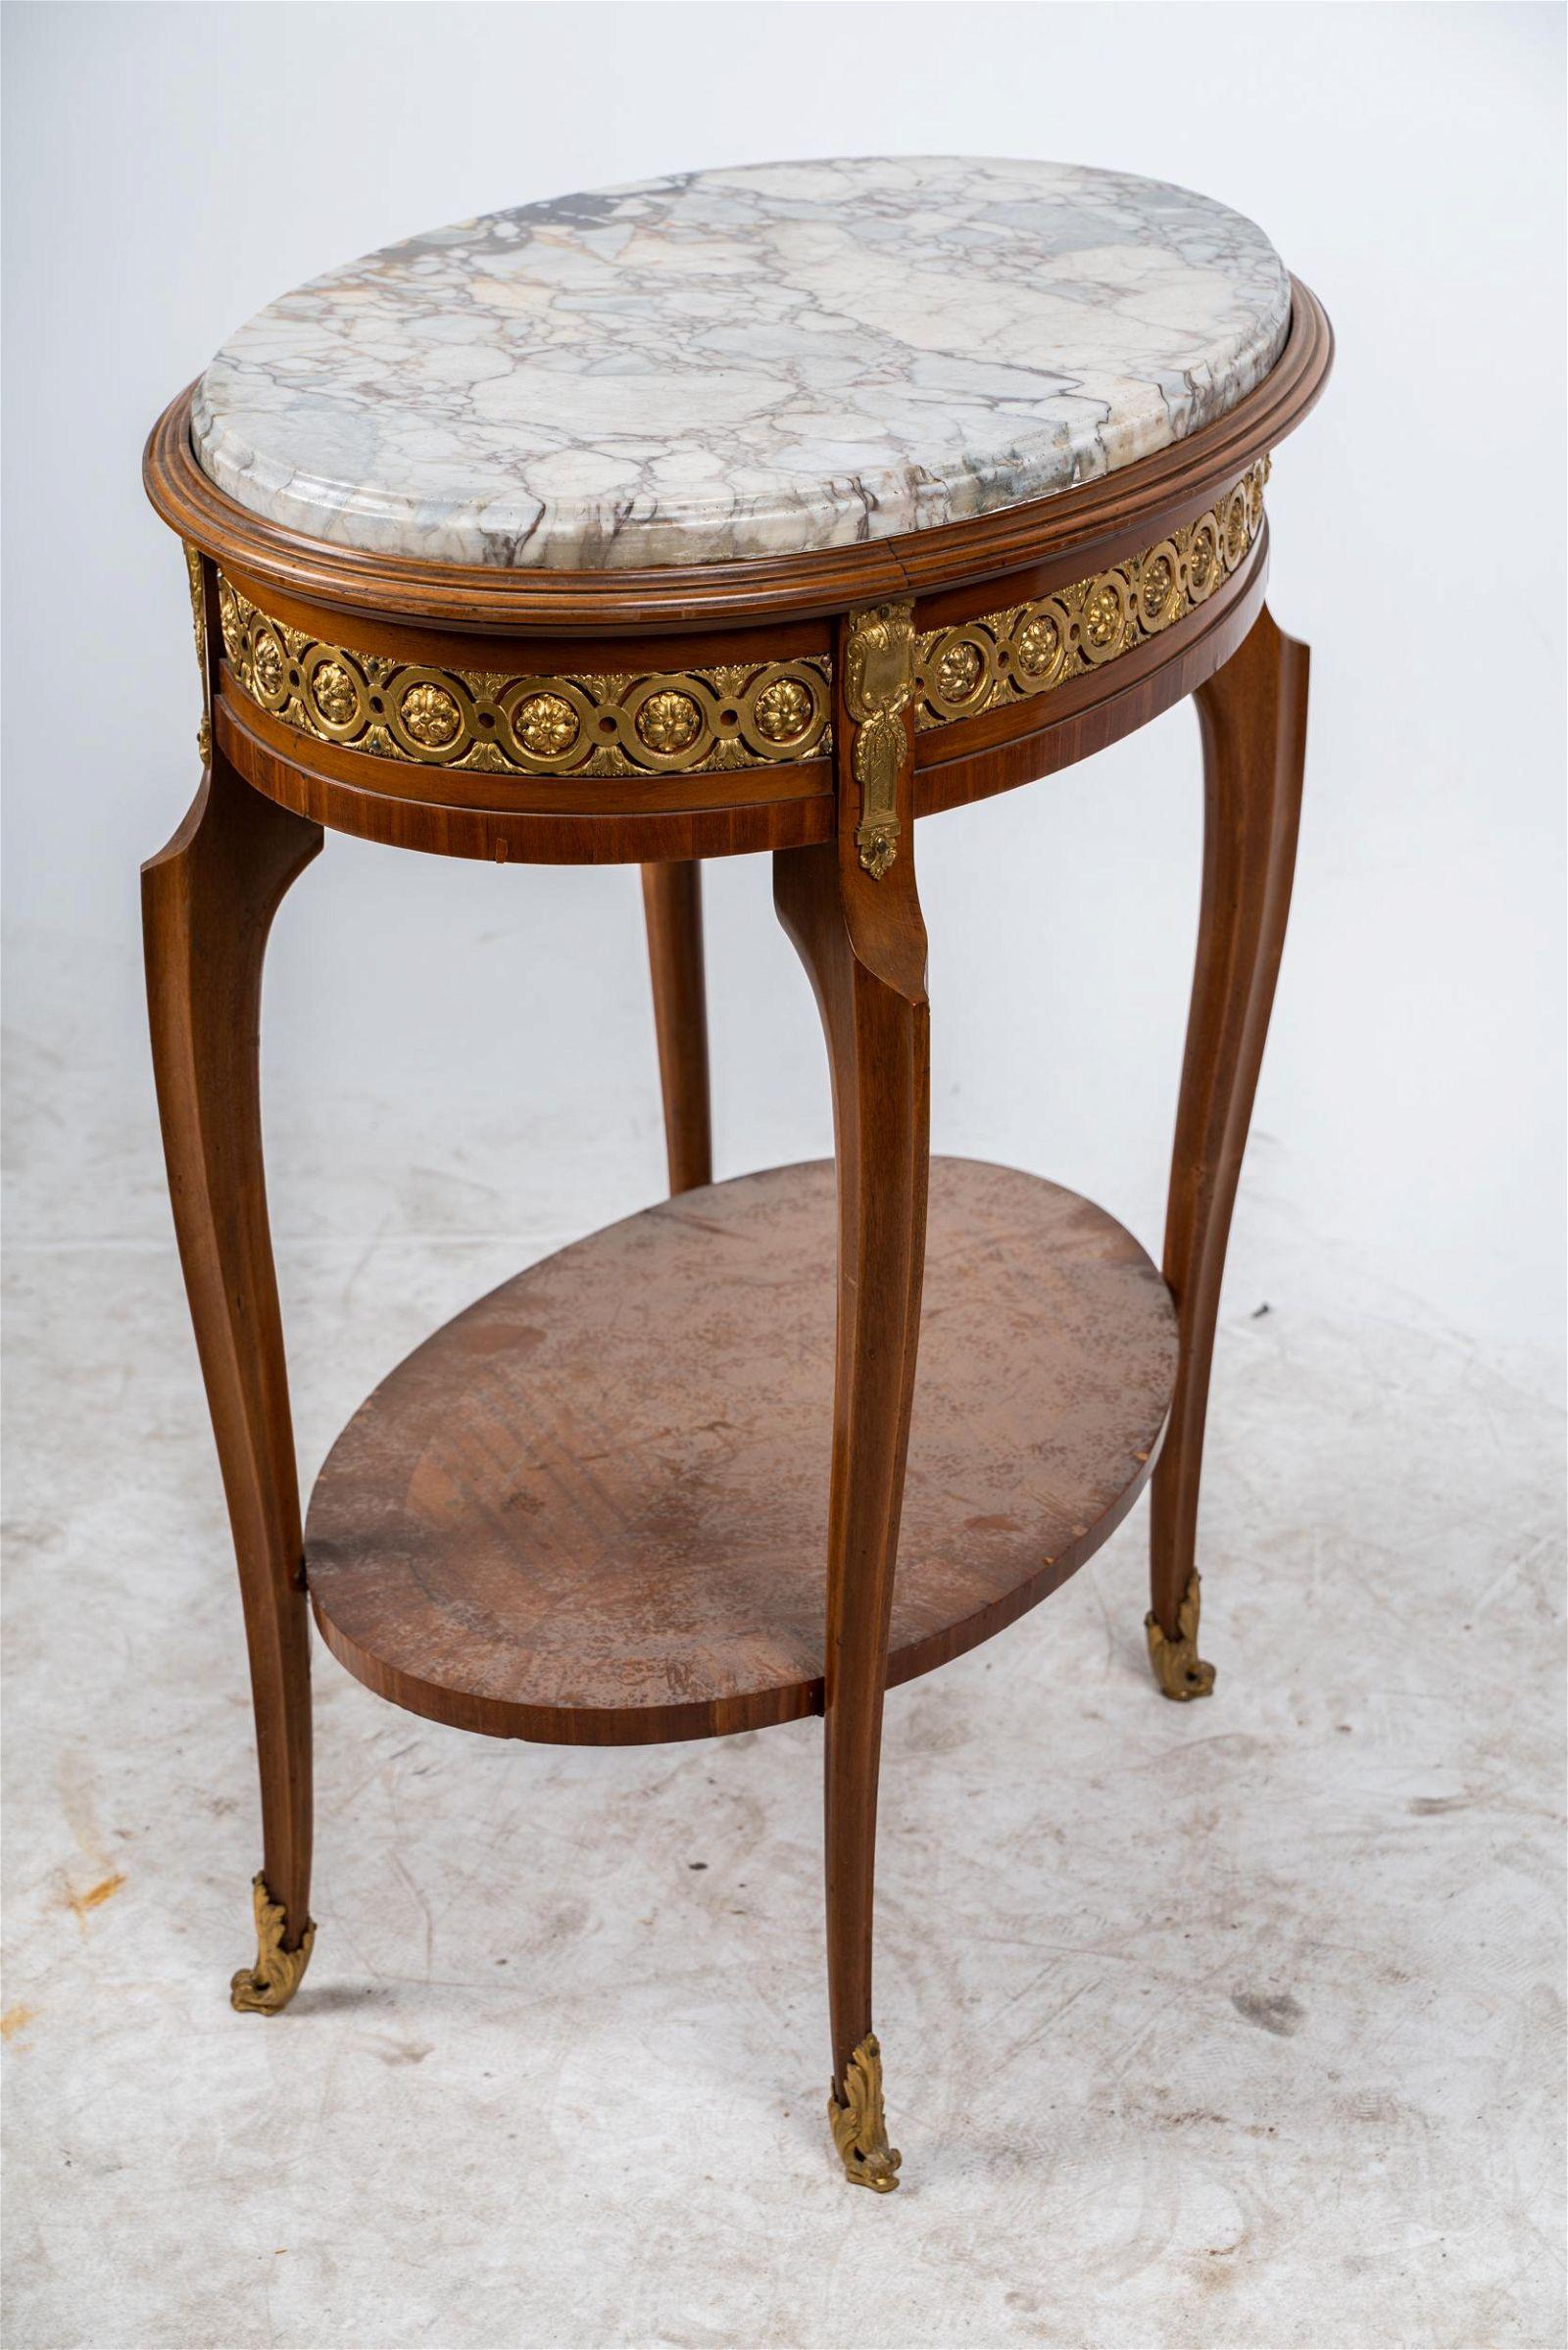 Antique French Louis XVI Transitional Walnut Marble Inset Gueridon Late 19th C For Sale 3